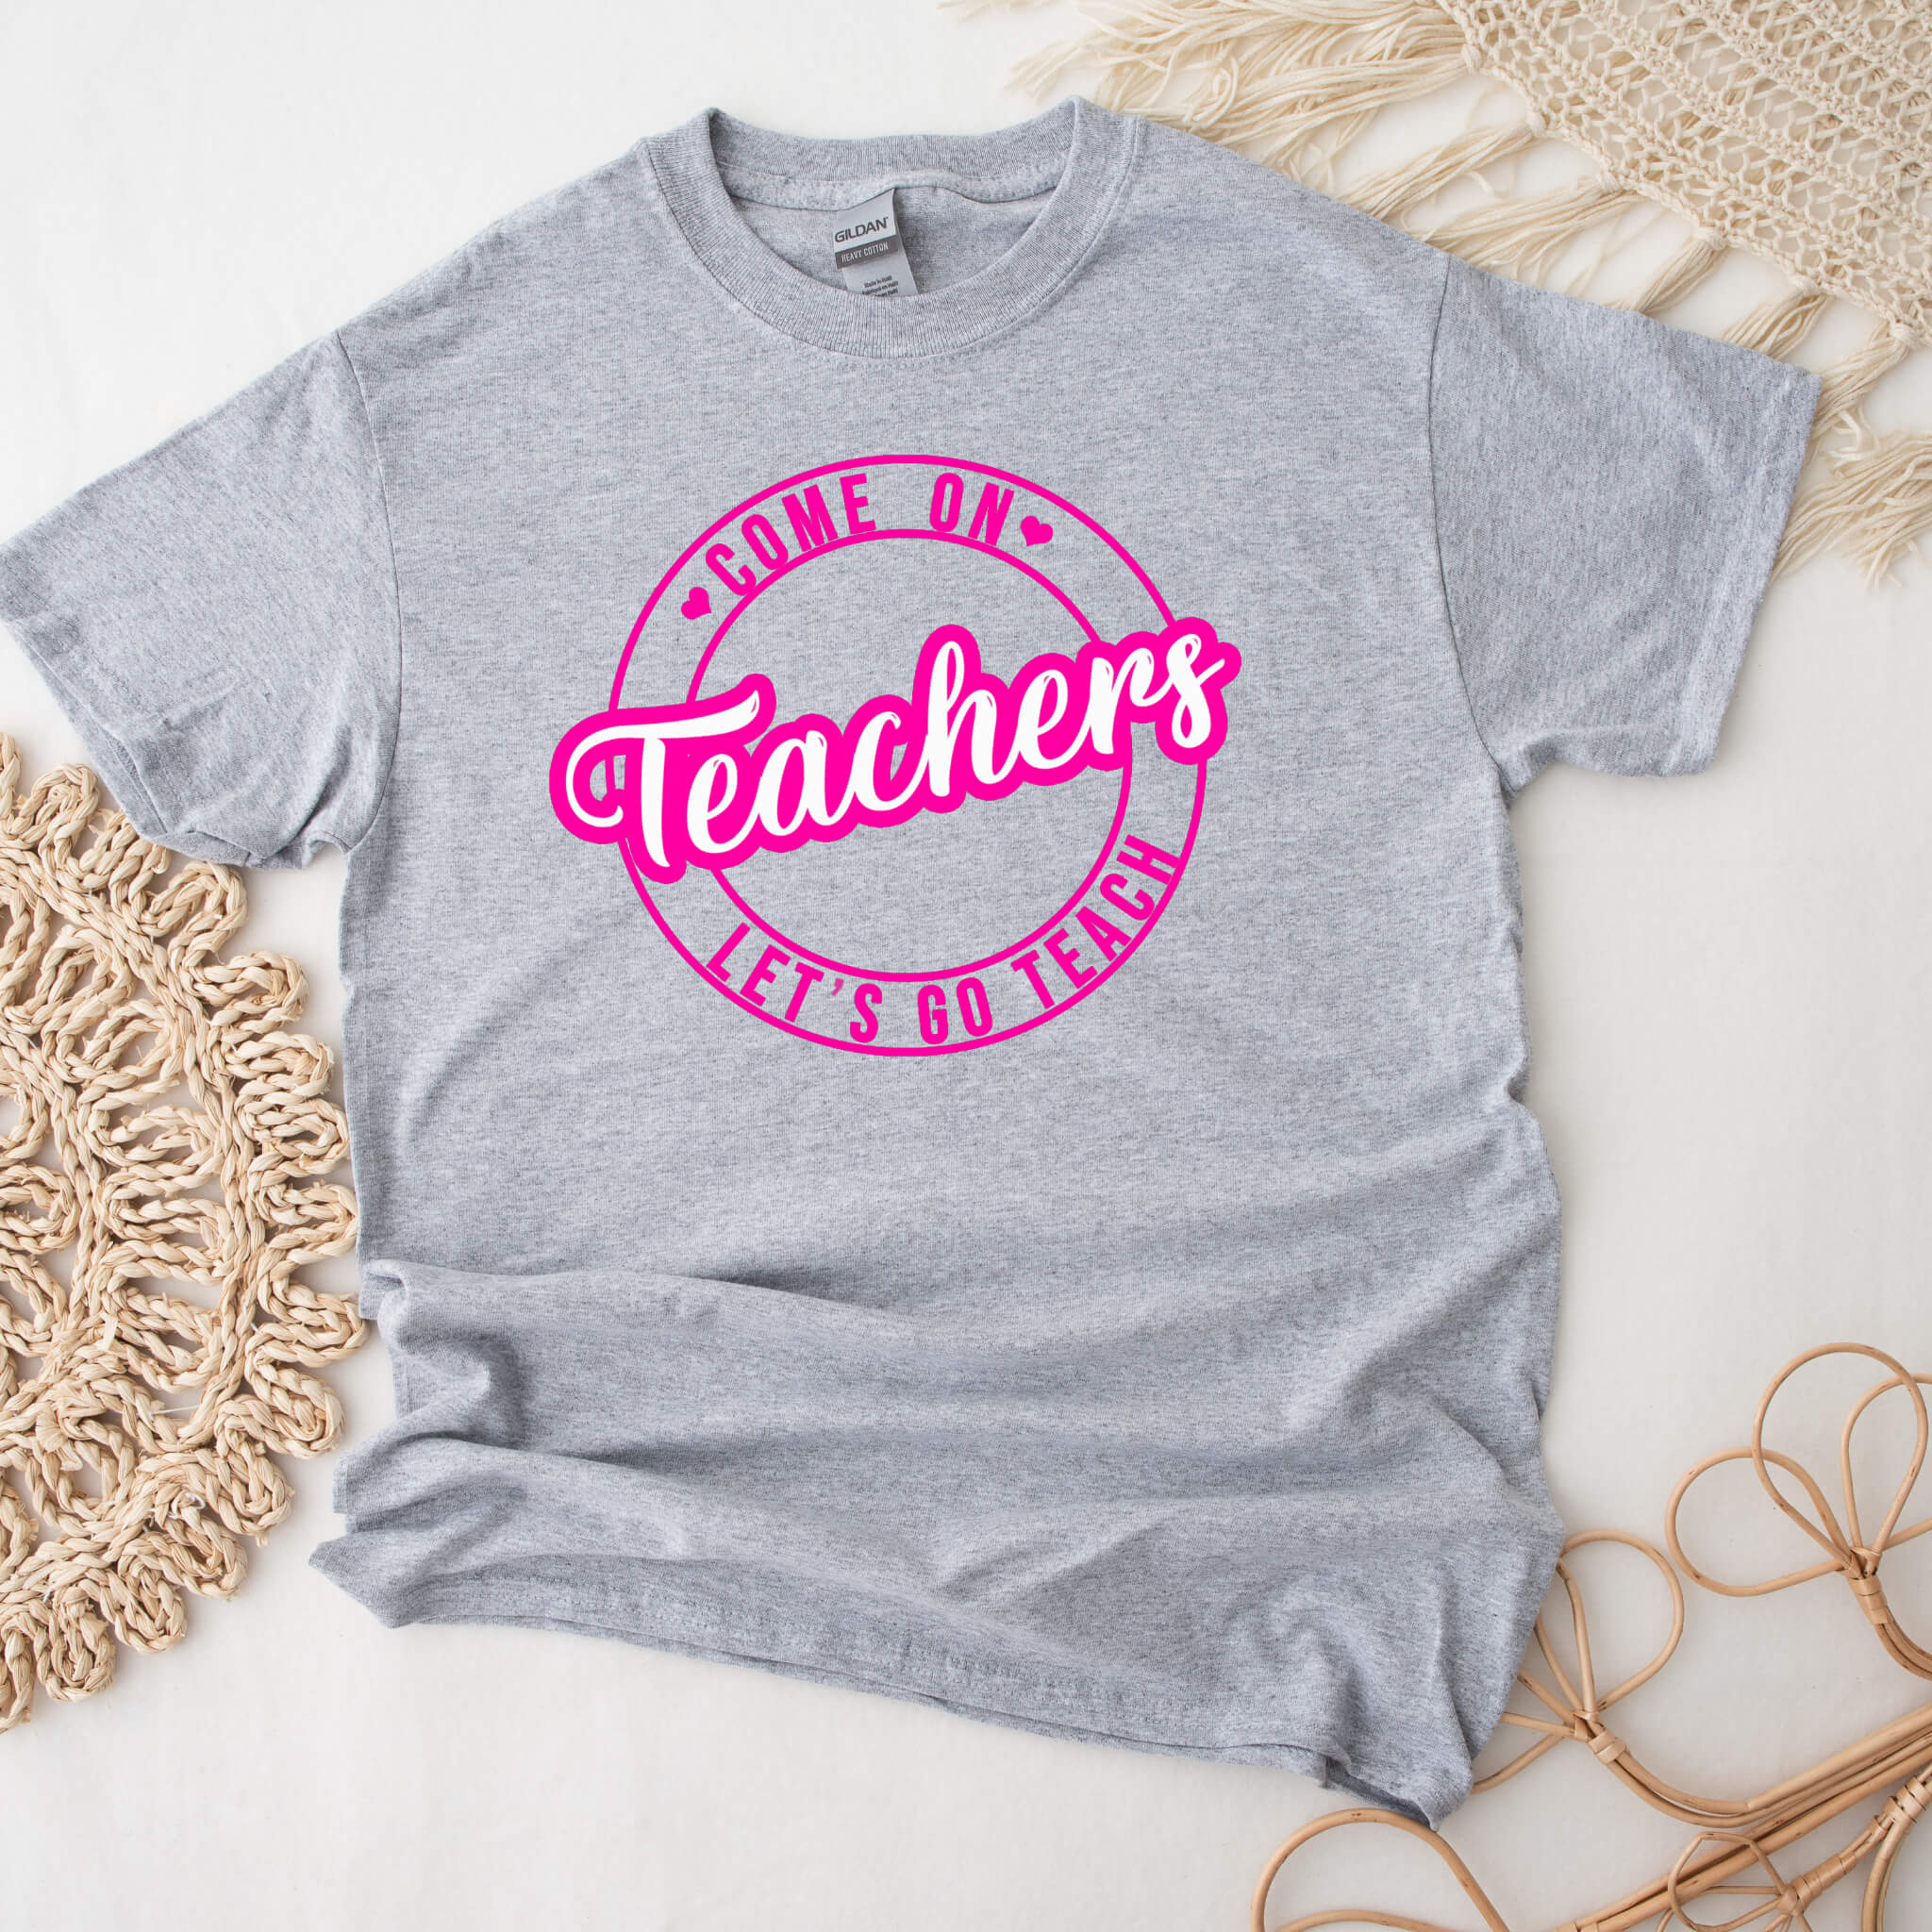 First Day of School Barbie Themed Come on Teachers Let’s Go Teach Women’s Graphic Print T-Shirt